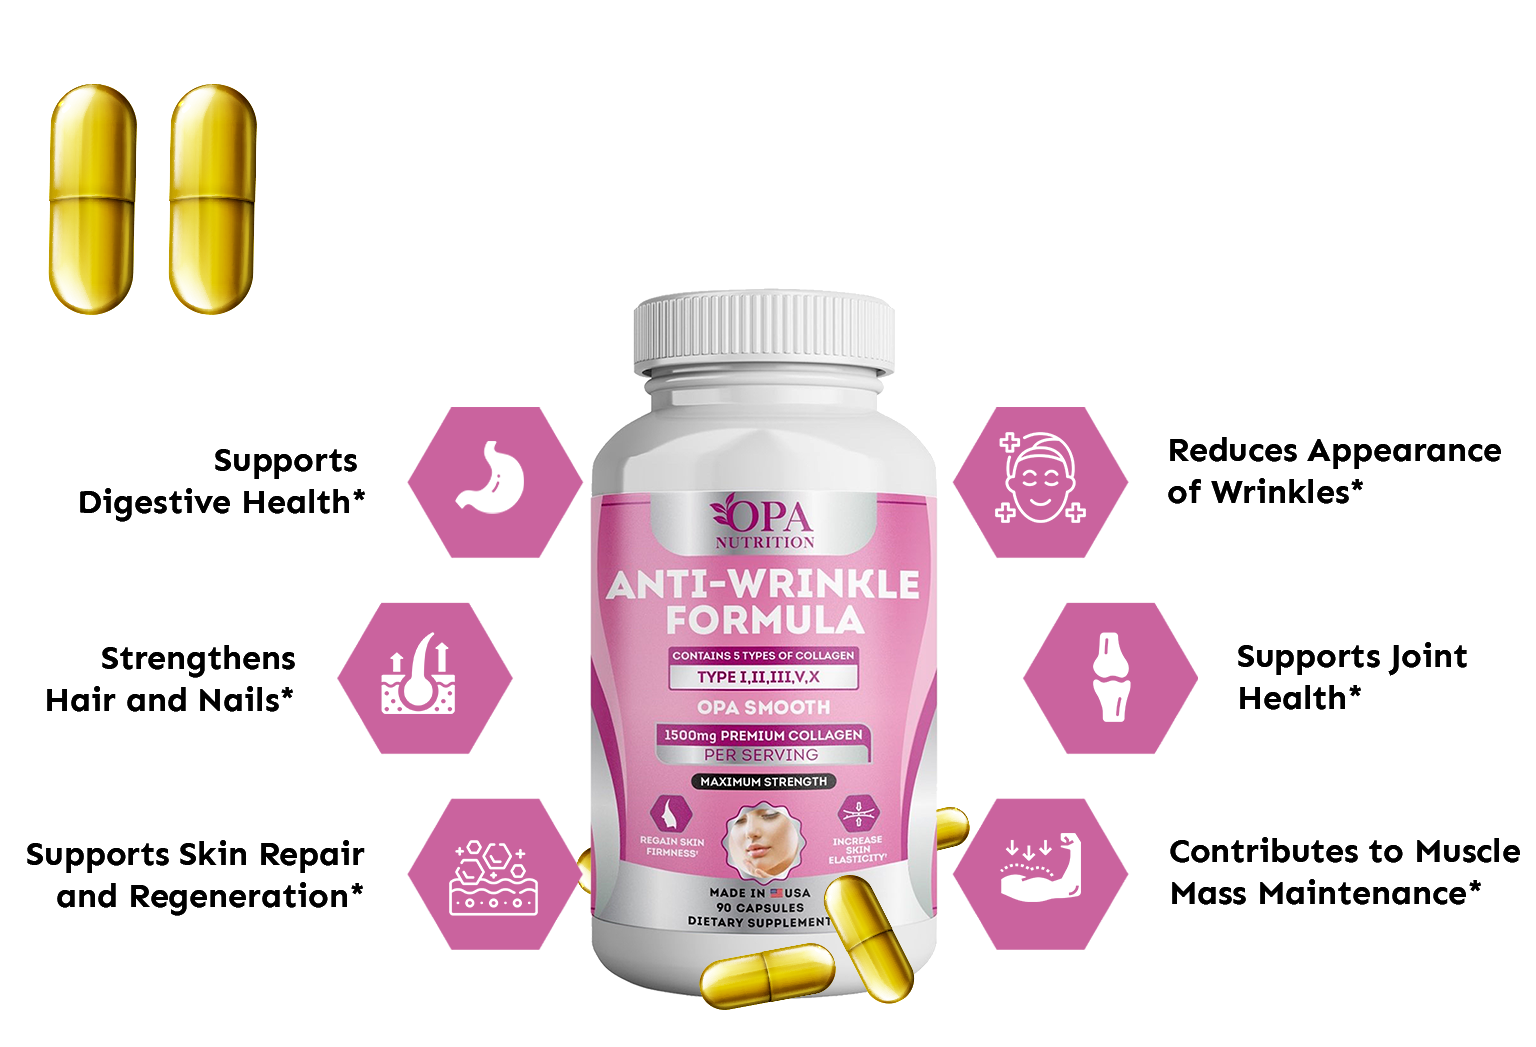 Benefits of Collagen Peptides Supplement 1500mg Types I II III V and X